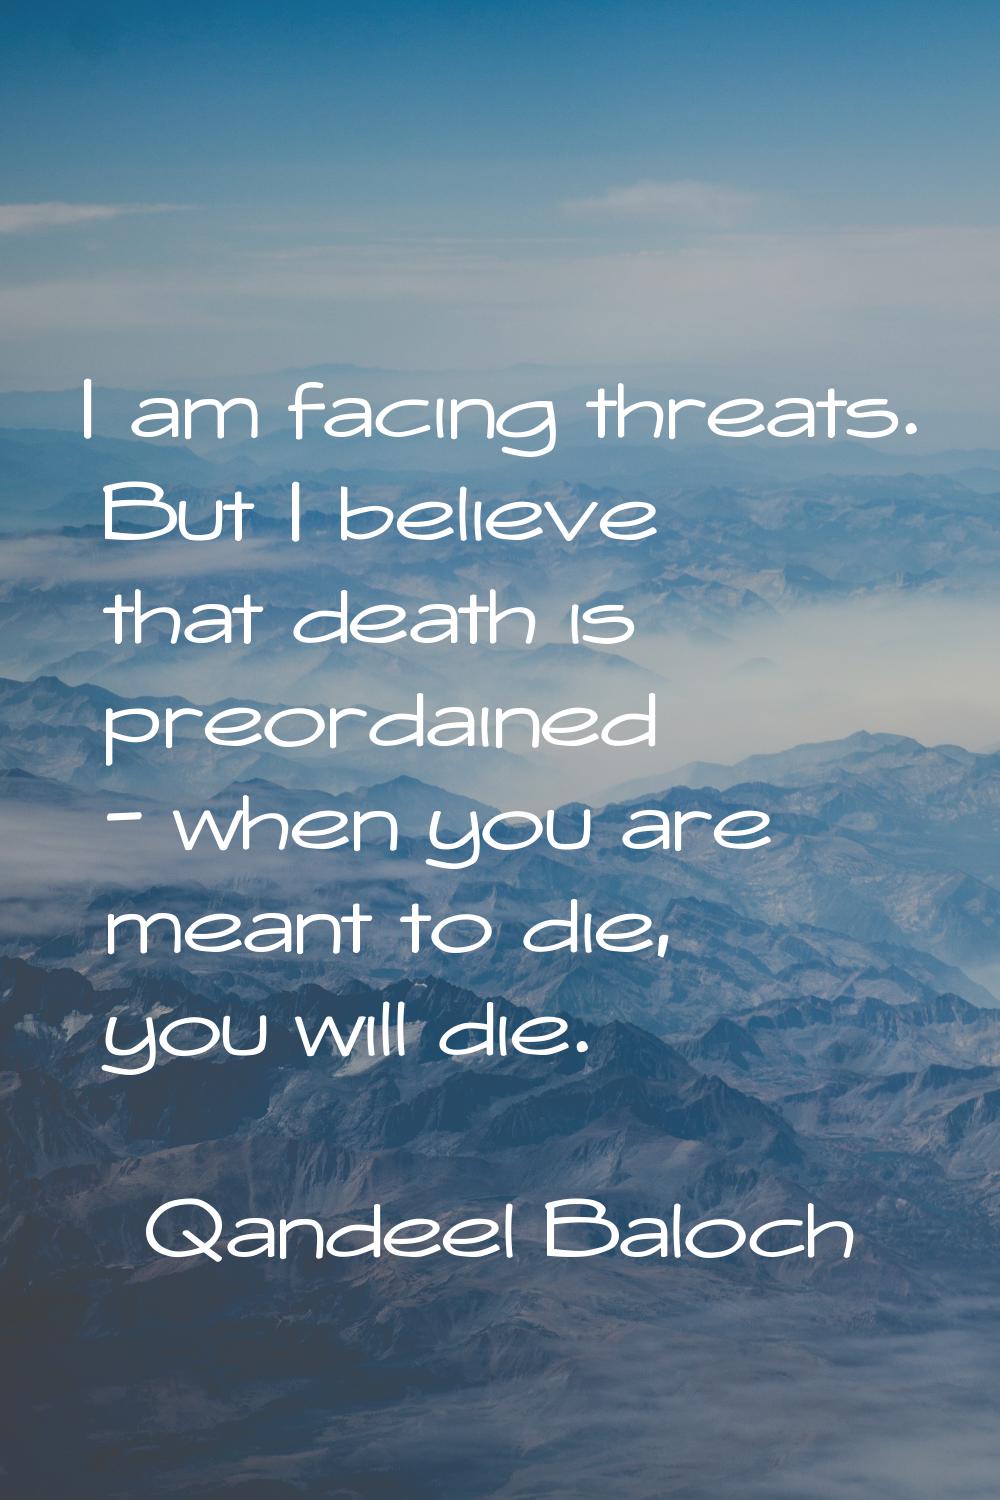 I am facing threats. But I believe that death is preordained - when you are meant to die, you will 